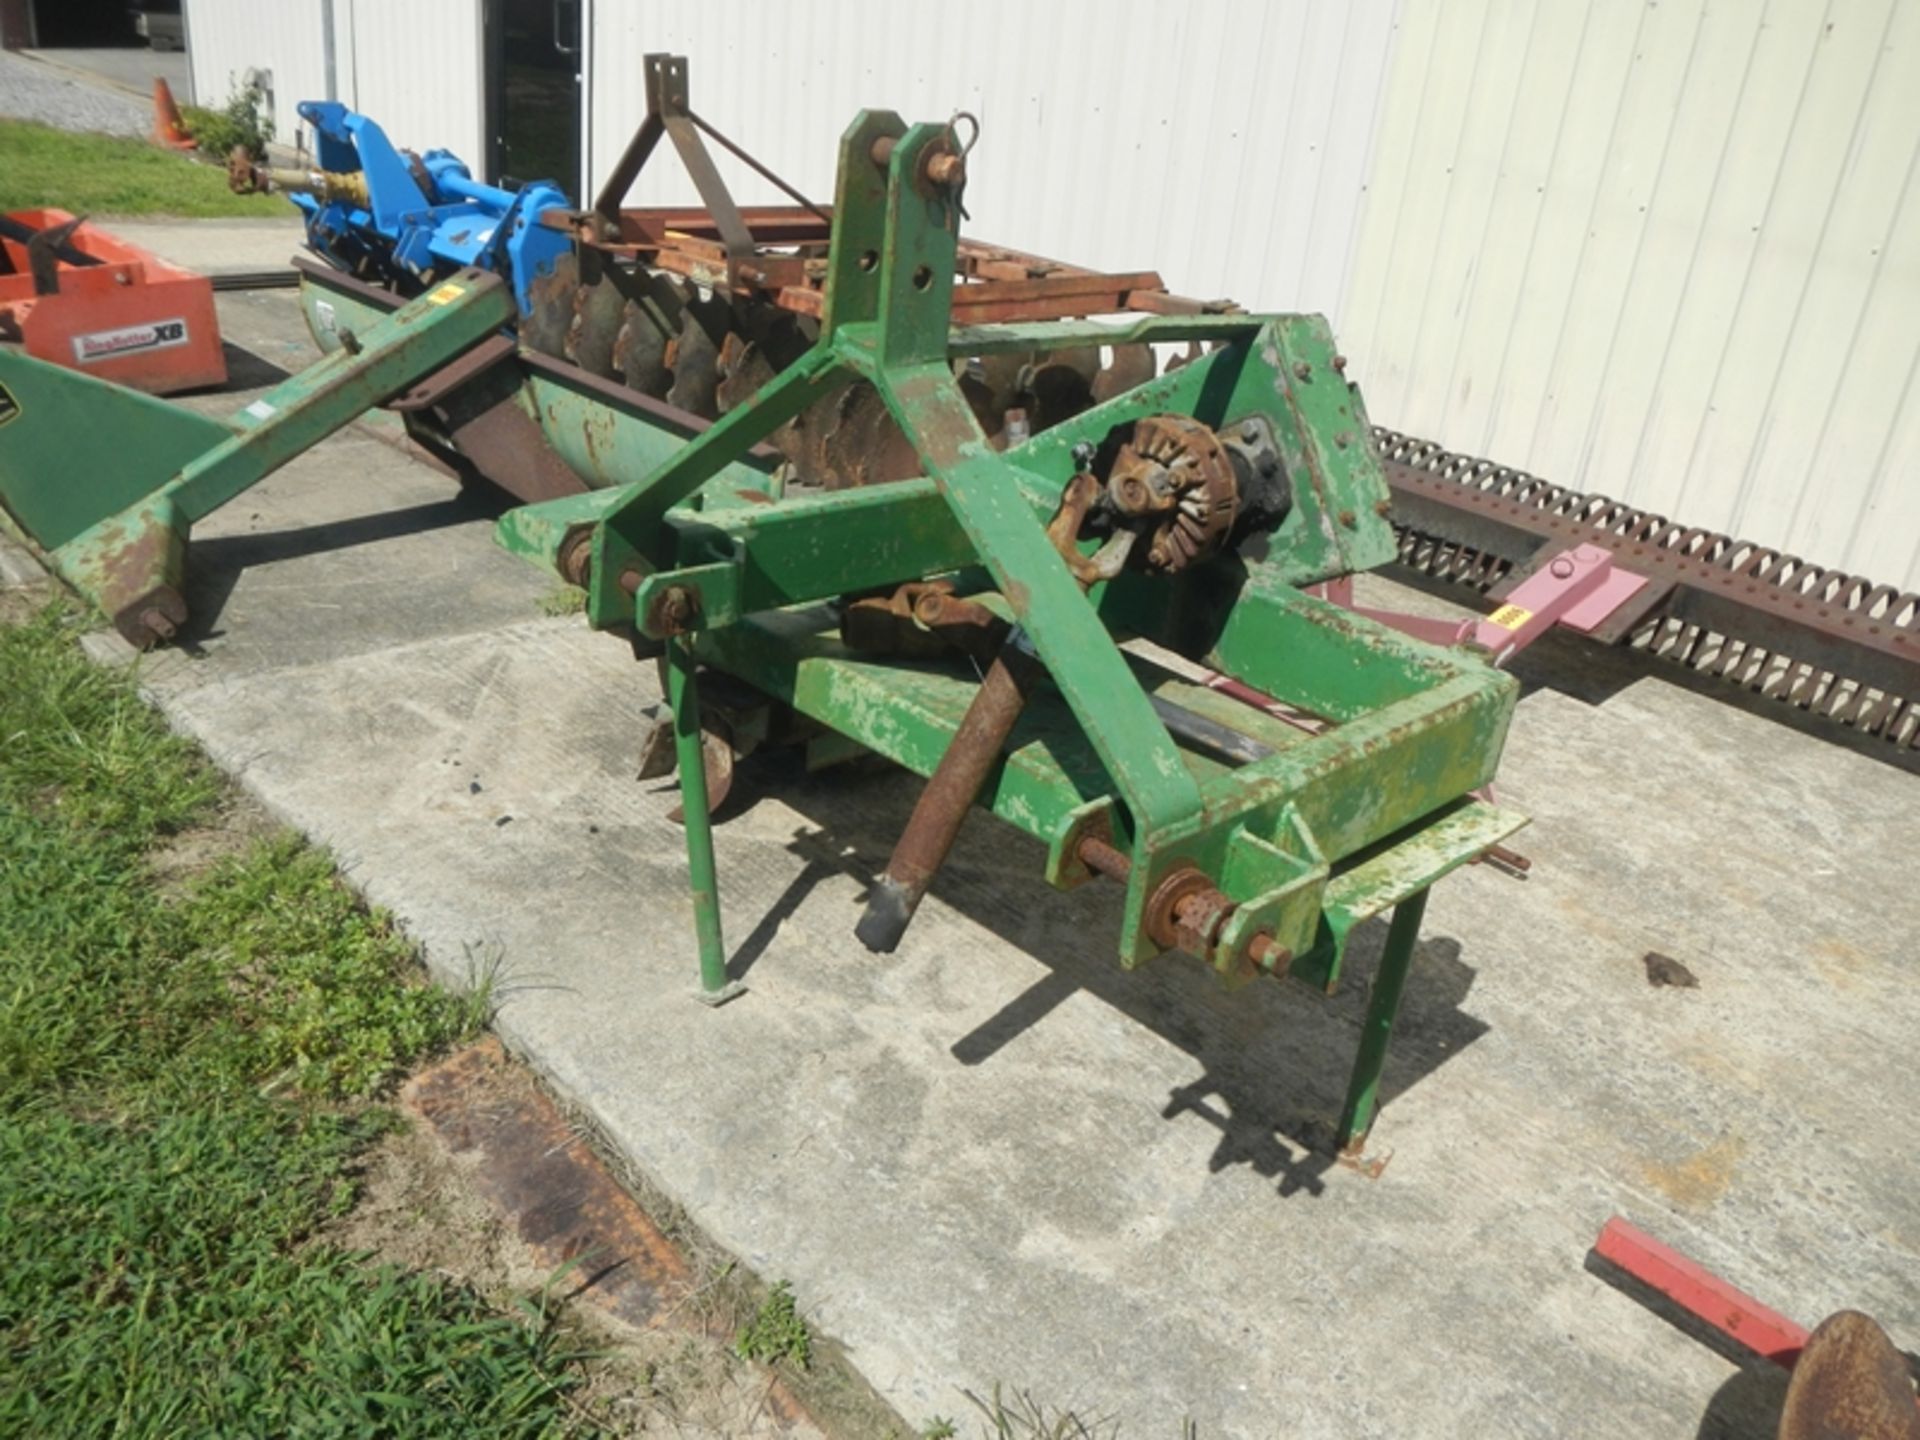 Reddick off set trencher has been modified so you can change bearings without removing bottom shaft